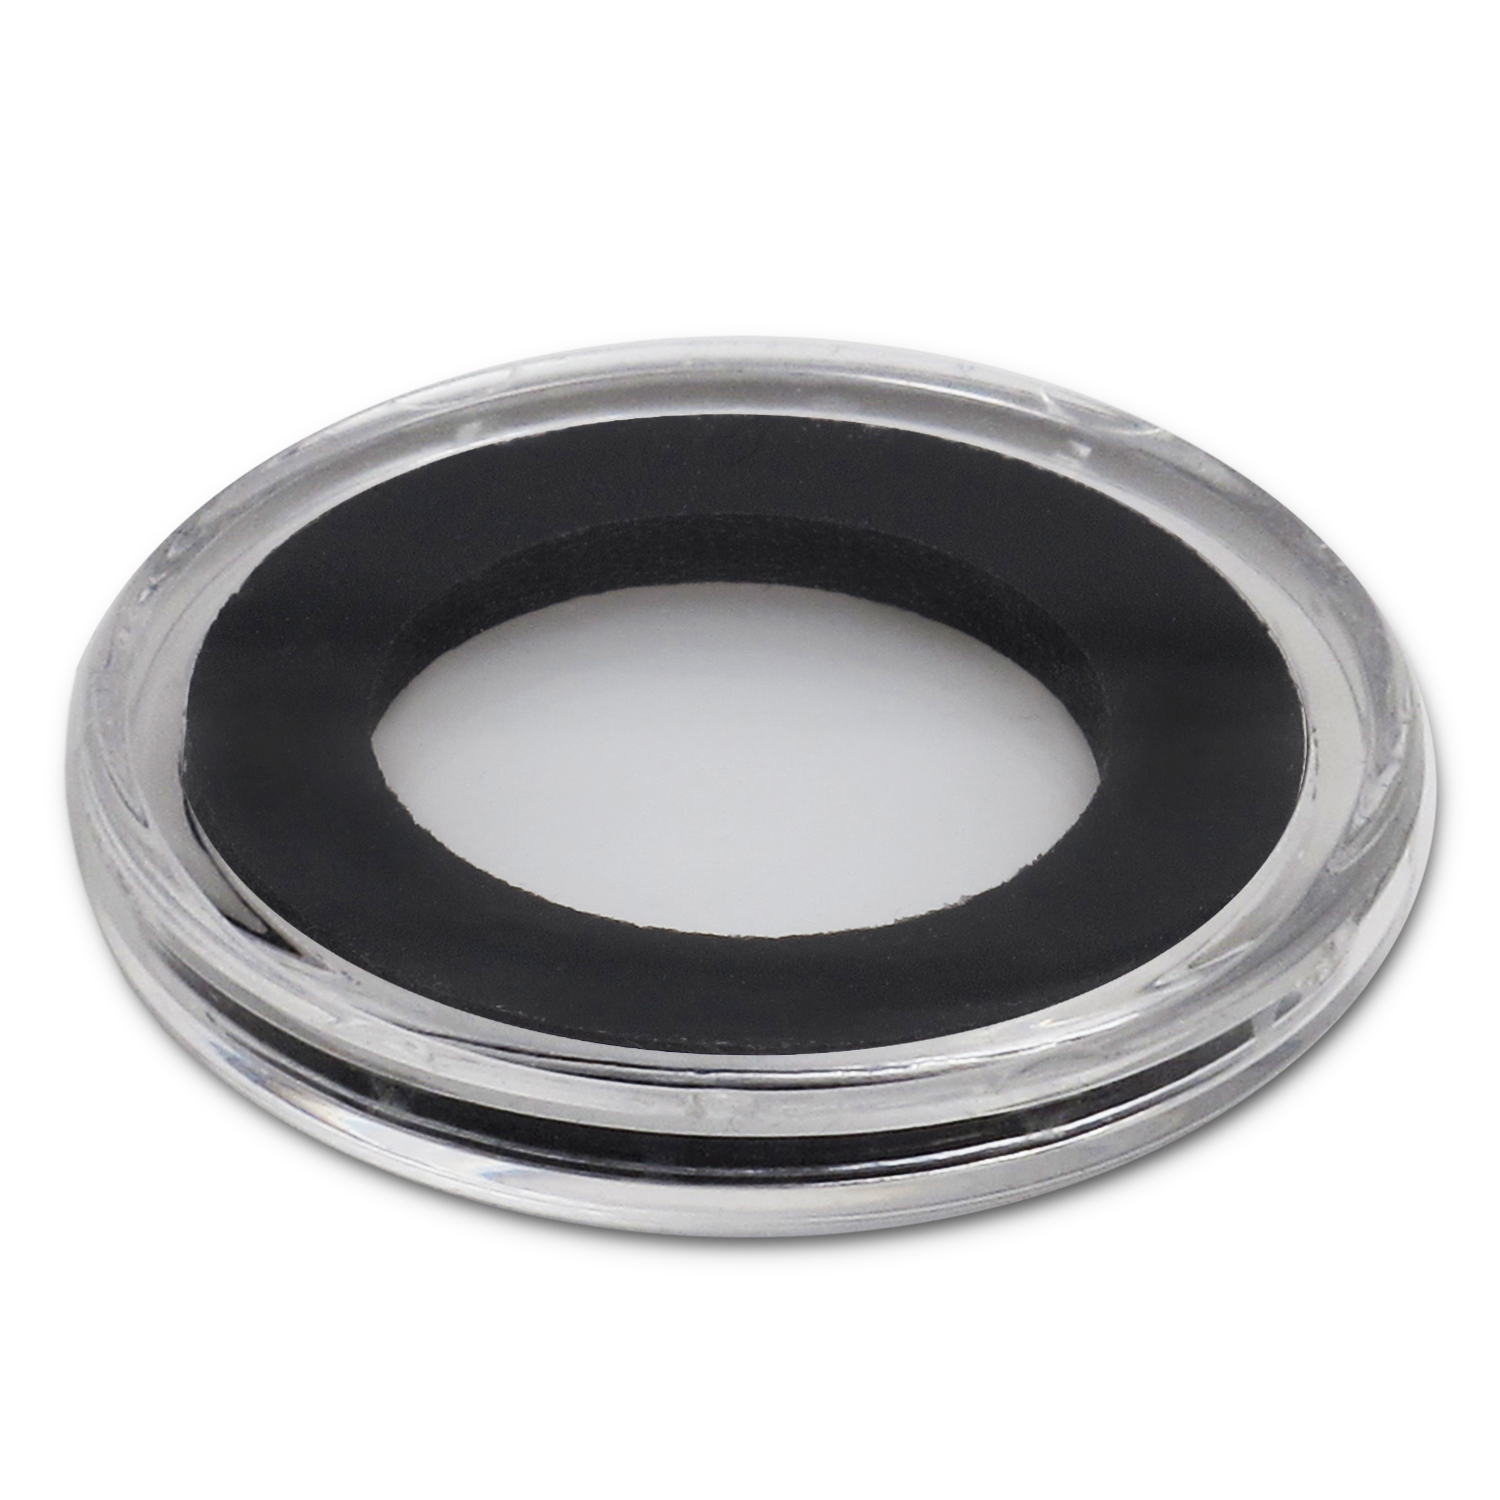 Buy Air-Tite Holder w/Black Gasket - 26 mm - Click Image to Close